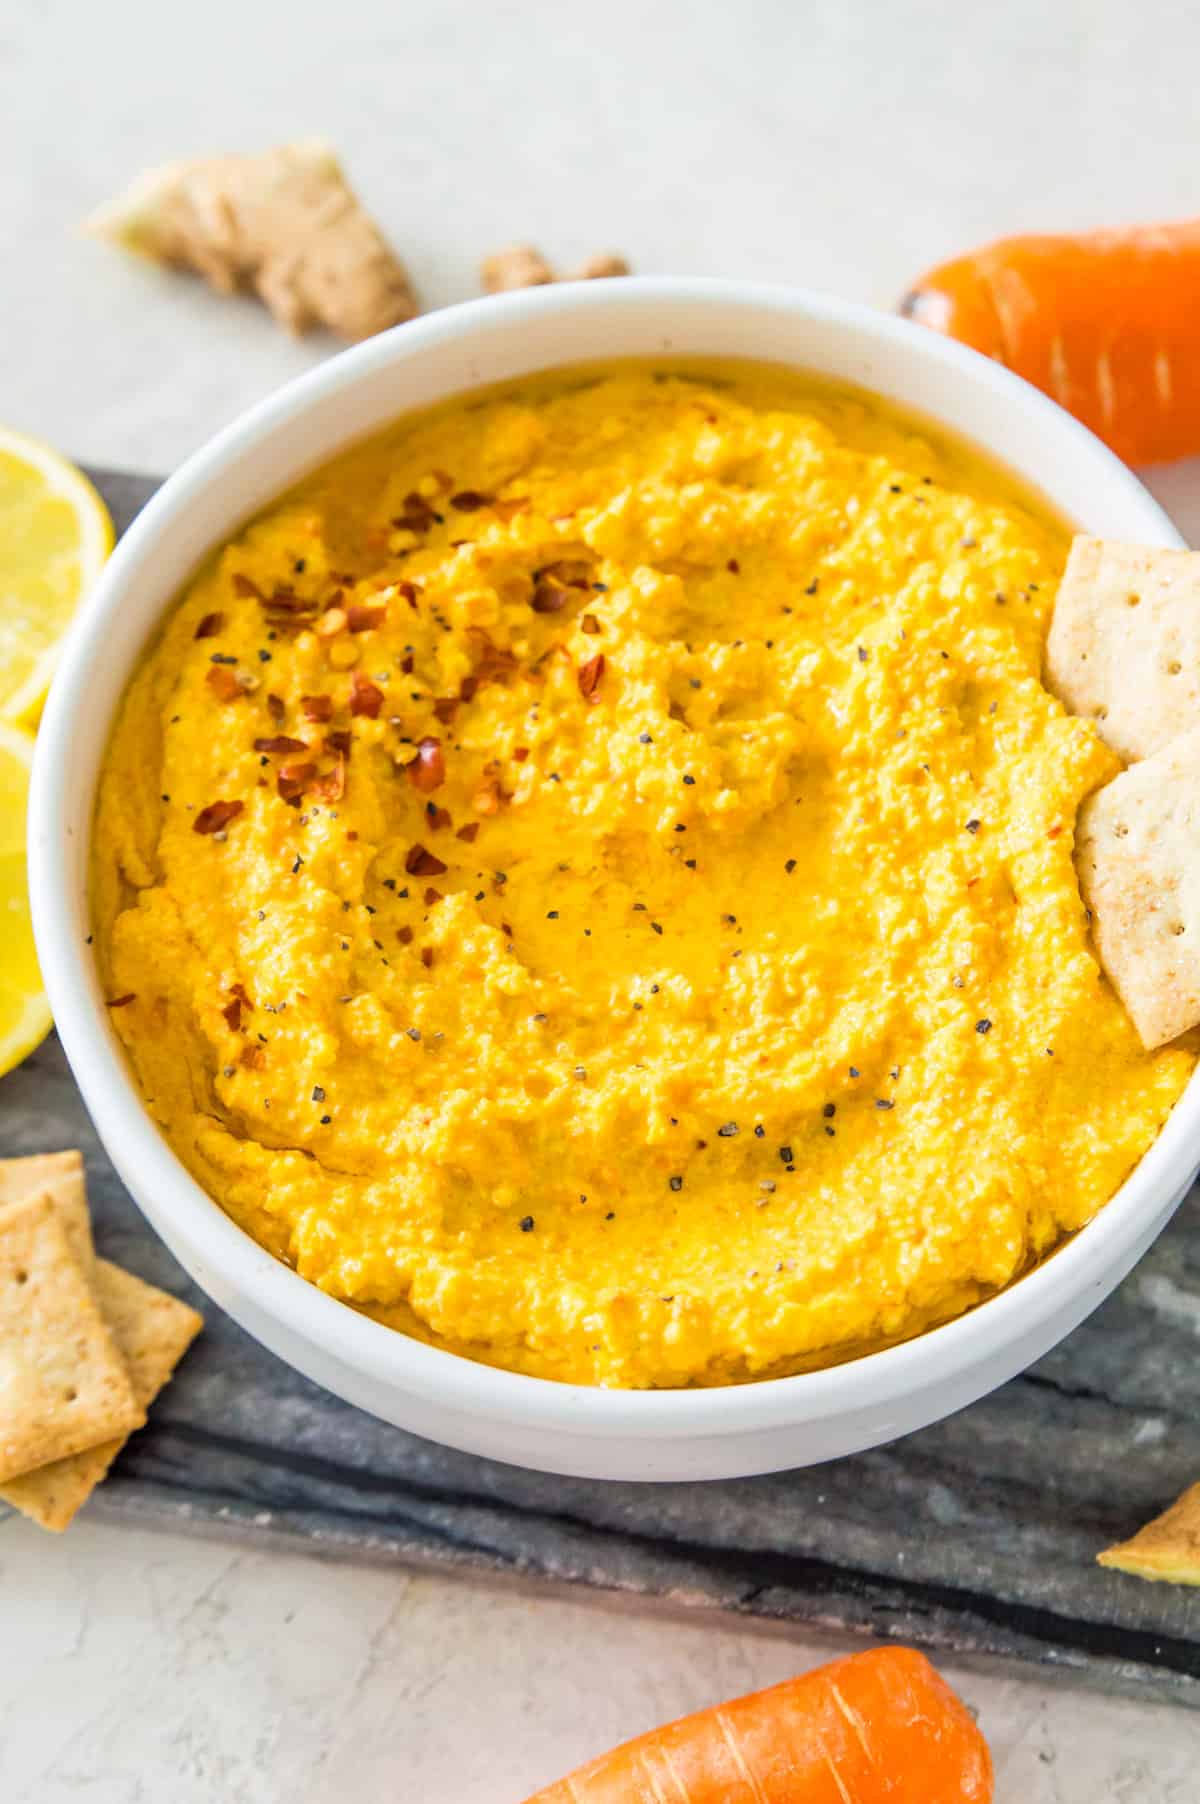 A bowl filled with a carrot dip topped with chili flakes with two crackers in it.